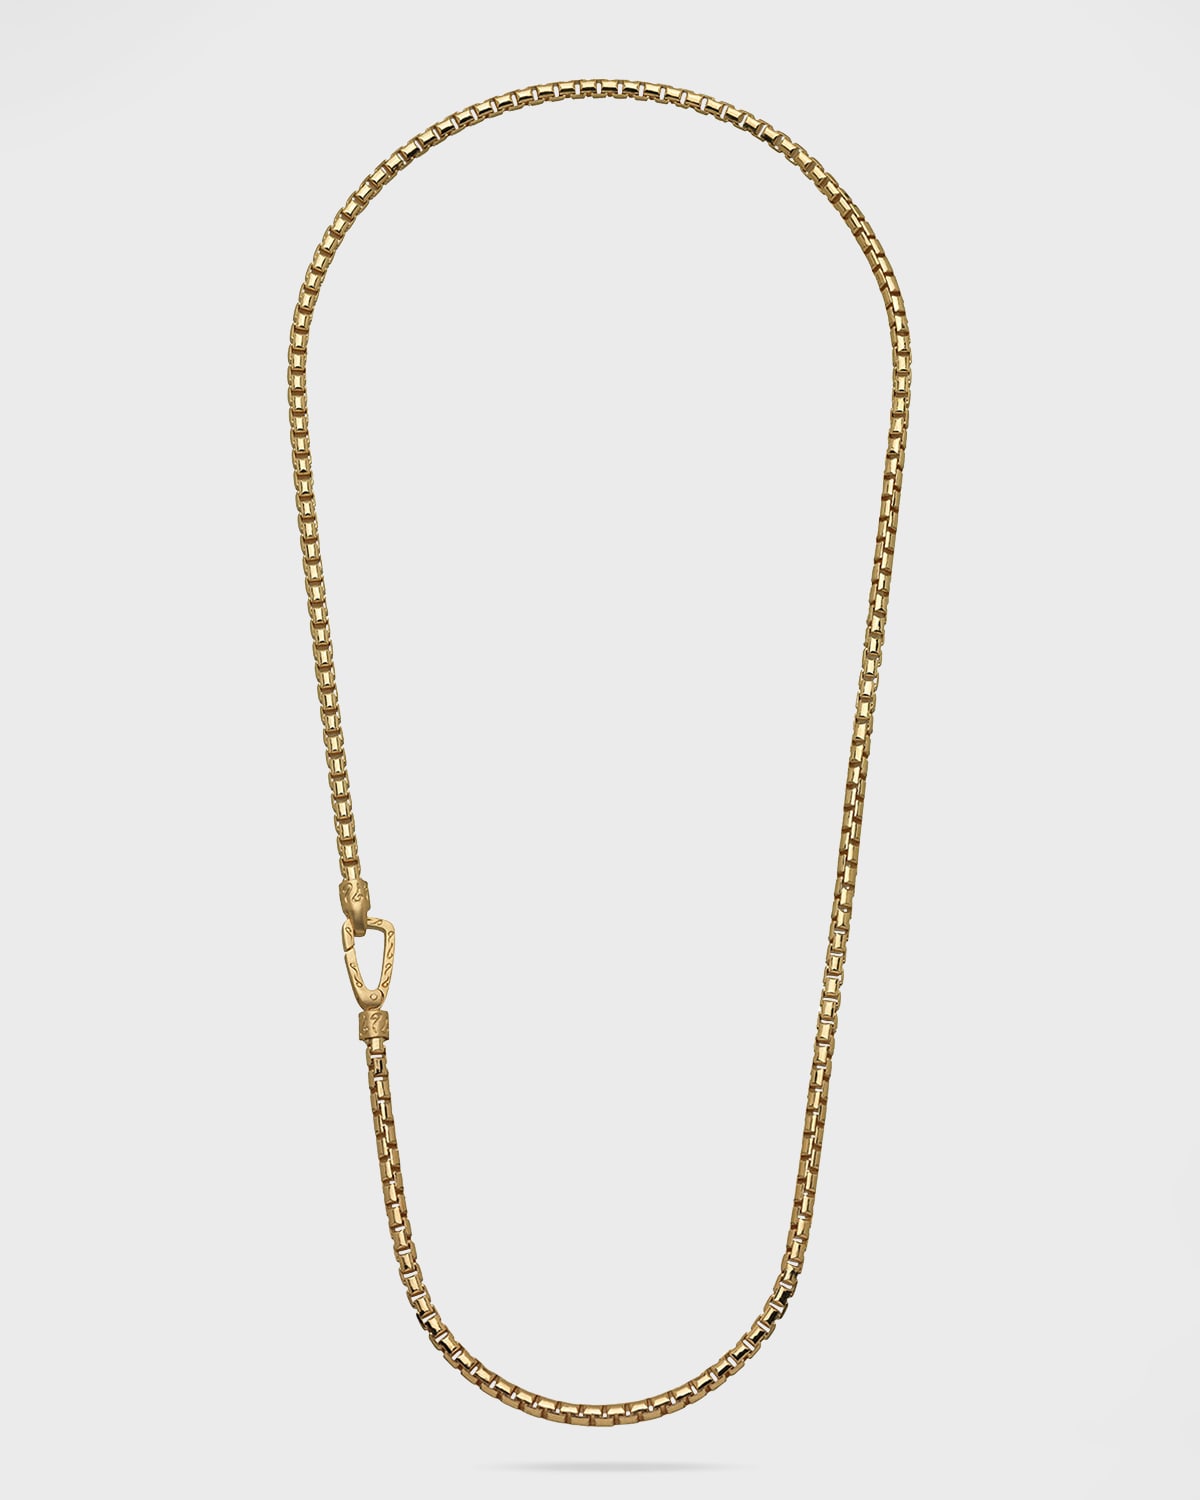 Marco Dal Maso Carved Tubular Yellow Gold Plated Silver Necklace with Matte Chain and Polished Clasp, 24"L